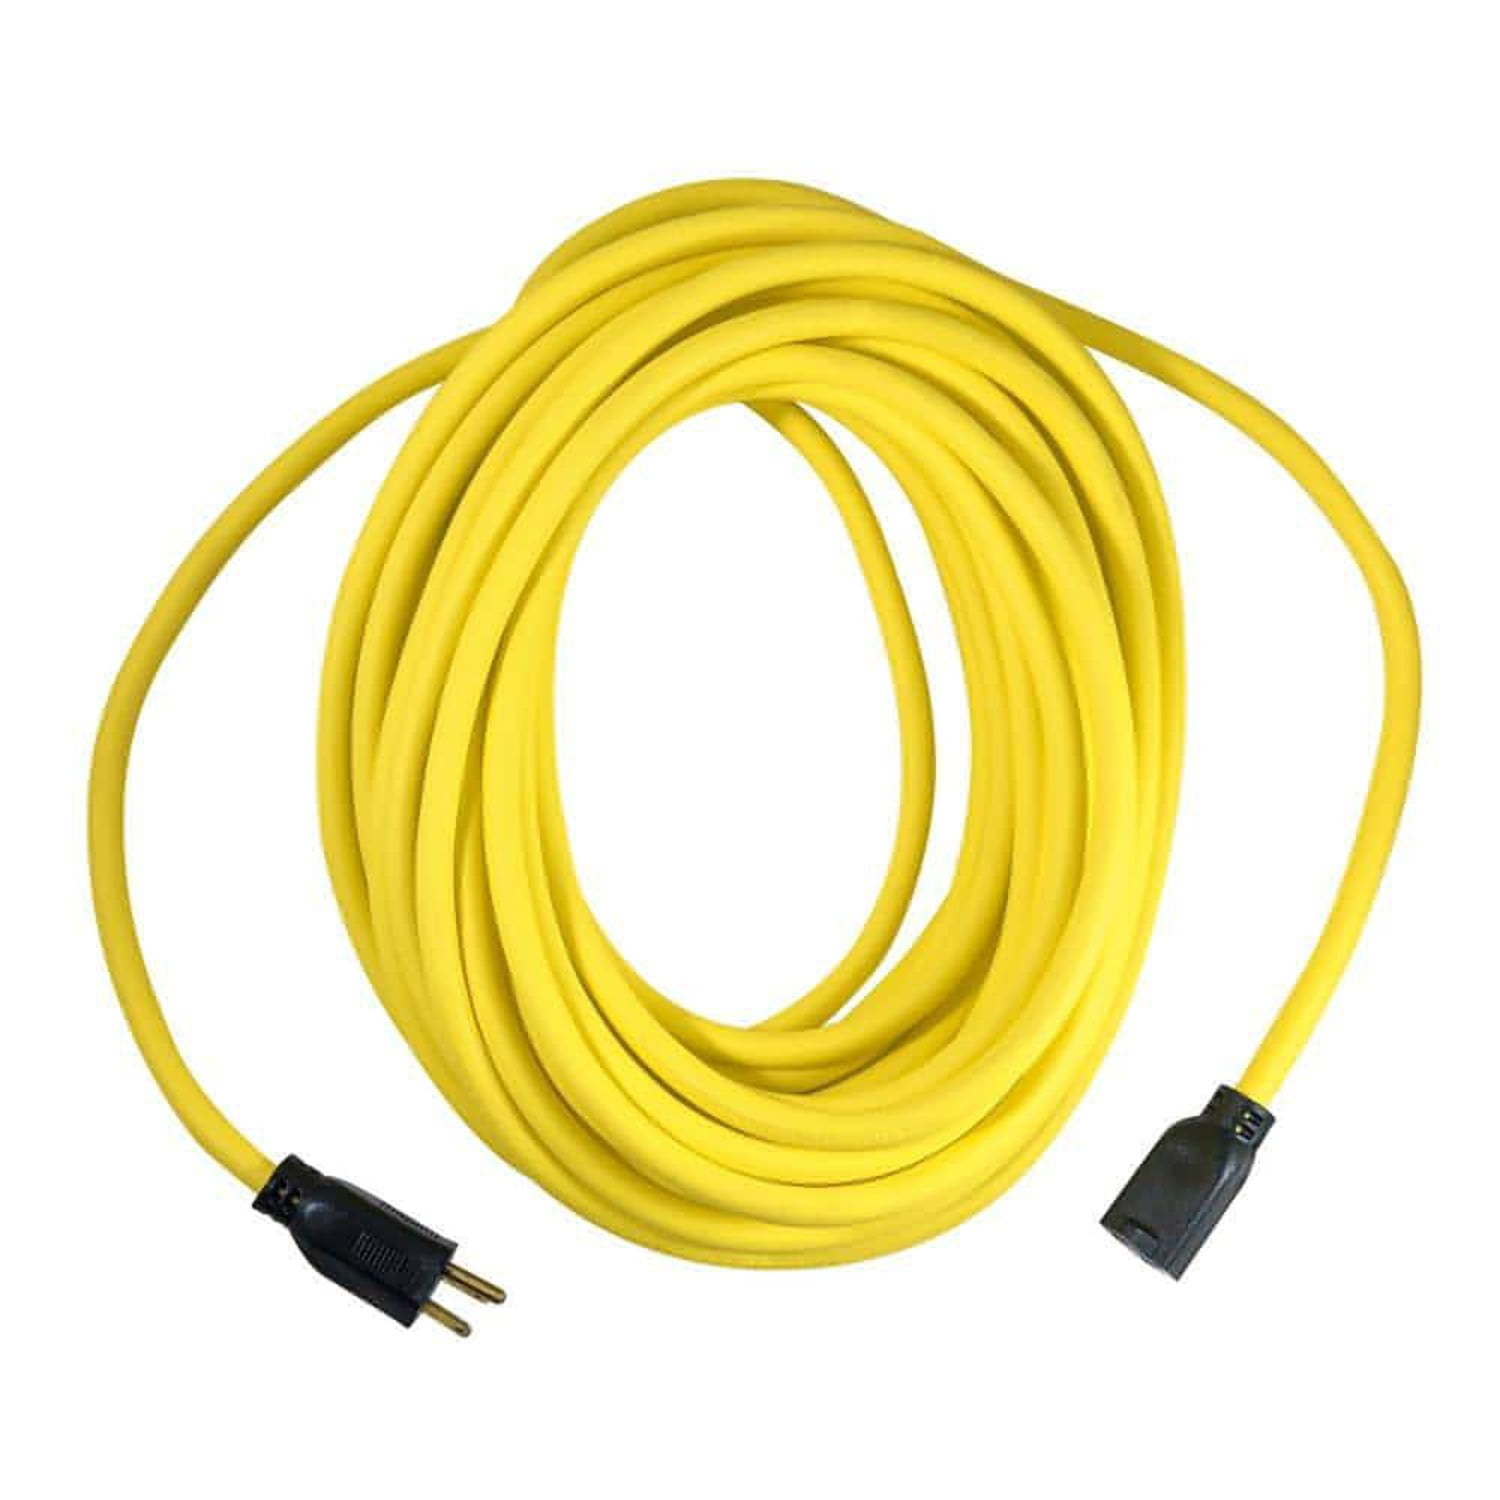 Husky 100 Ft. 12/3 Extension Cord, Yellow 